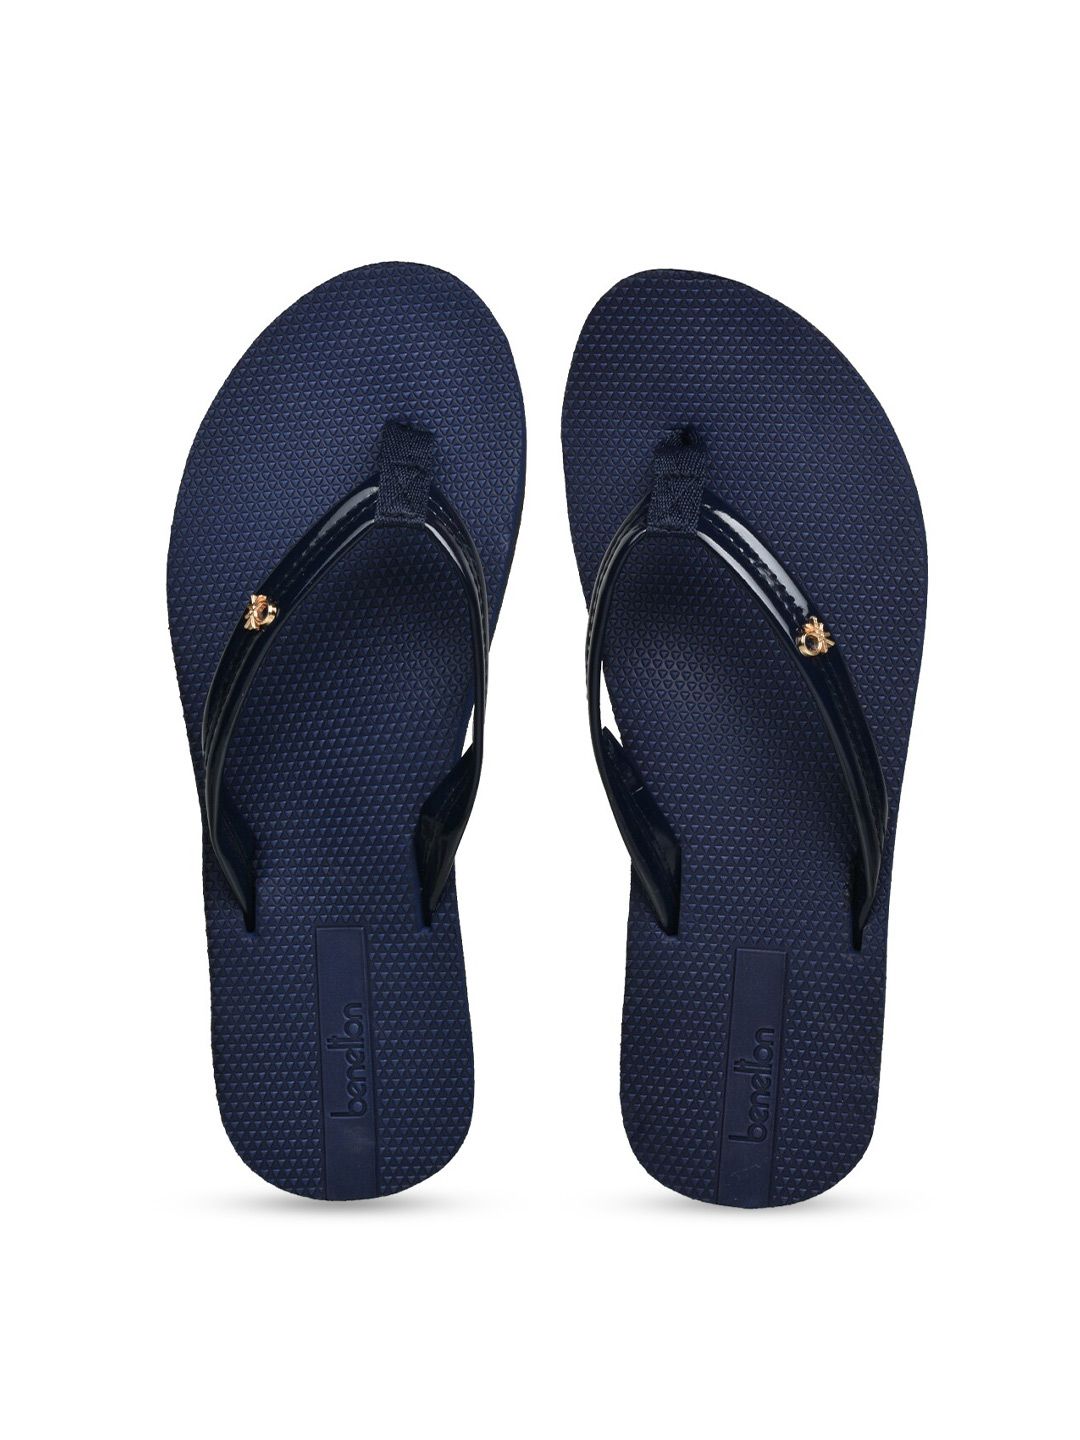 United Colors of Benetton Women Navy Blue Thong Flip-Flops Price in India